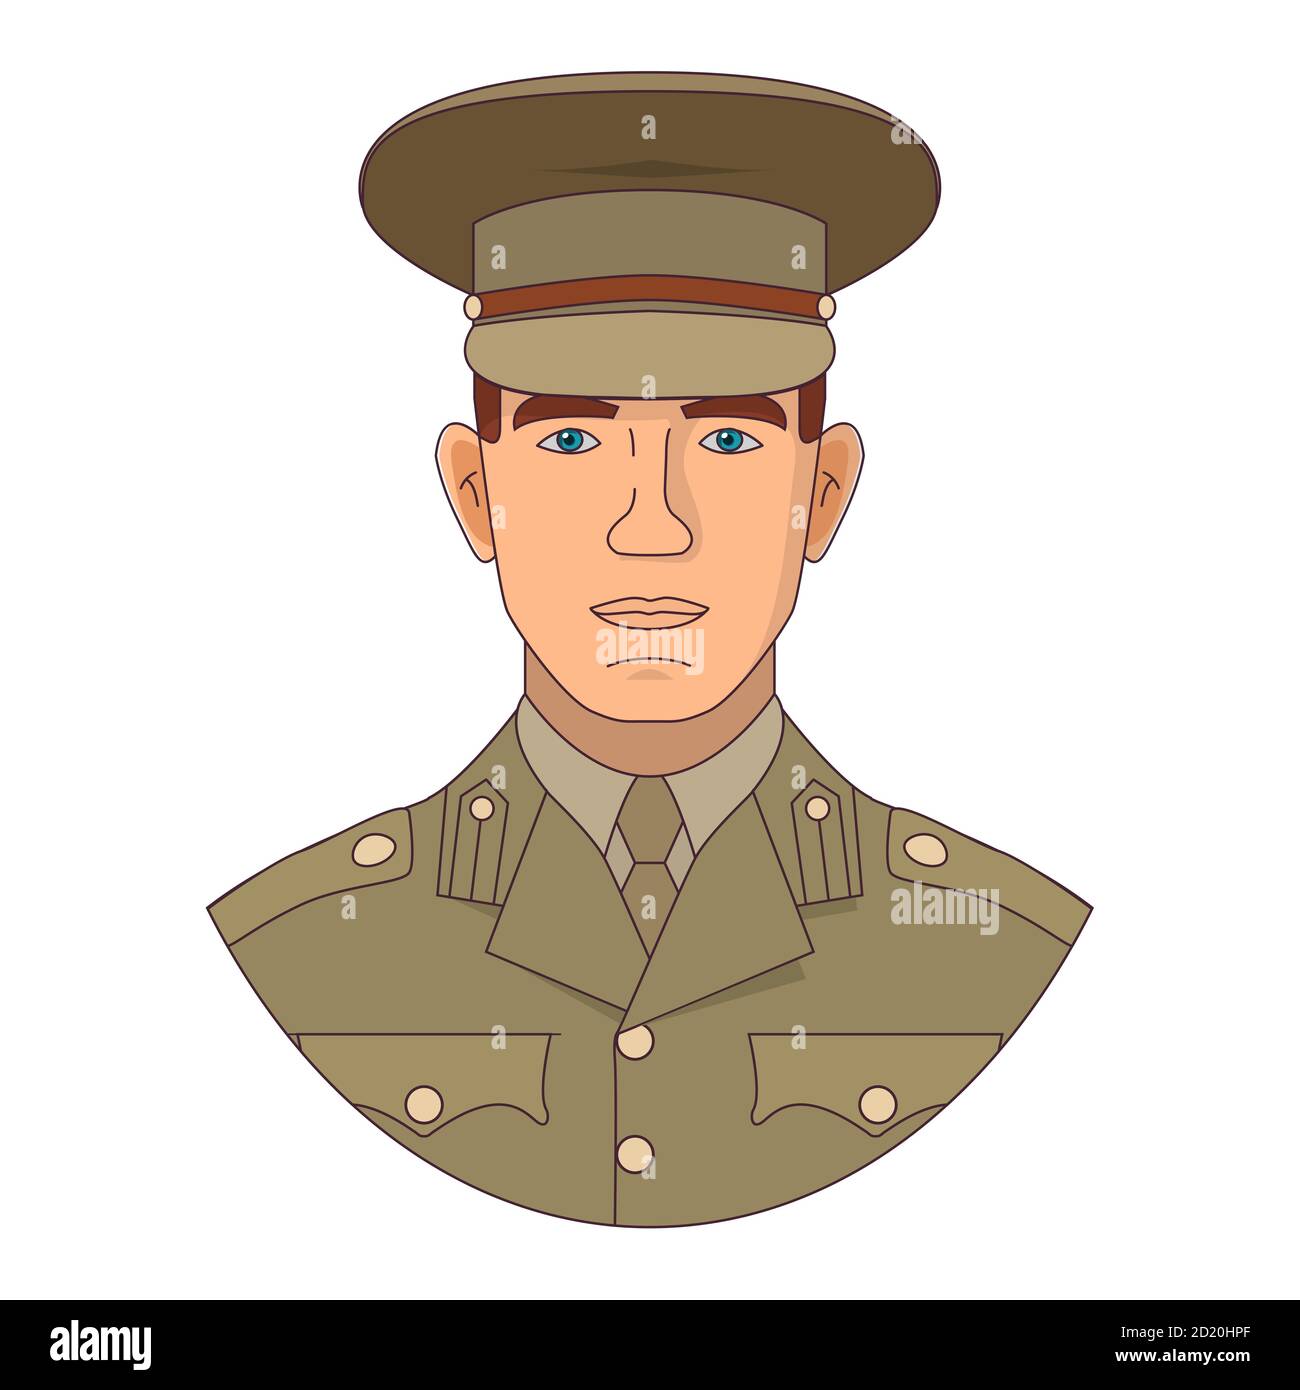 Army man soldier cartoon character .Military people, An officer in uniform and a cap. Stock Vector